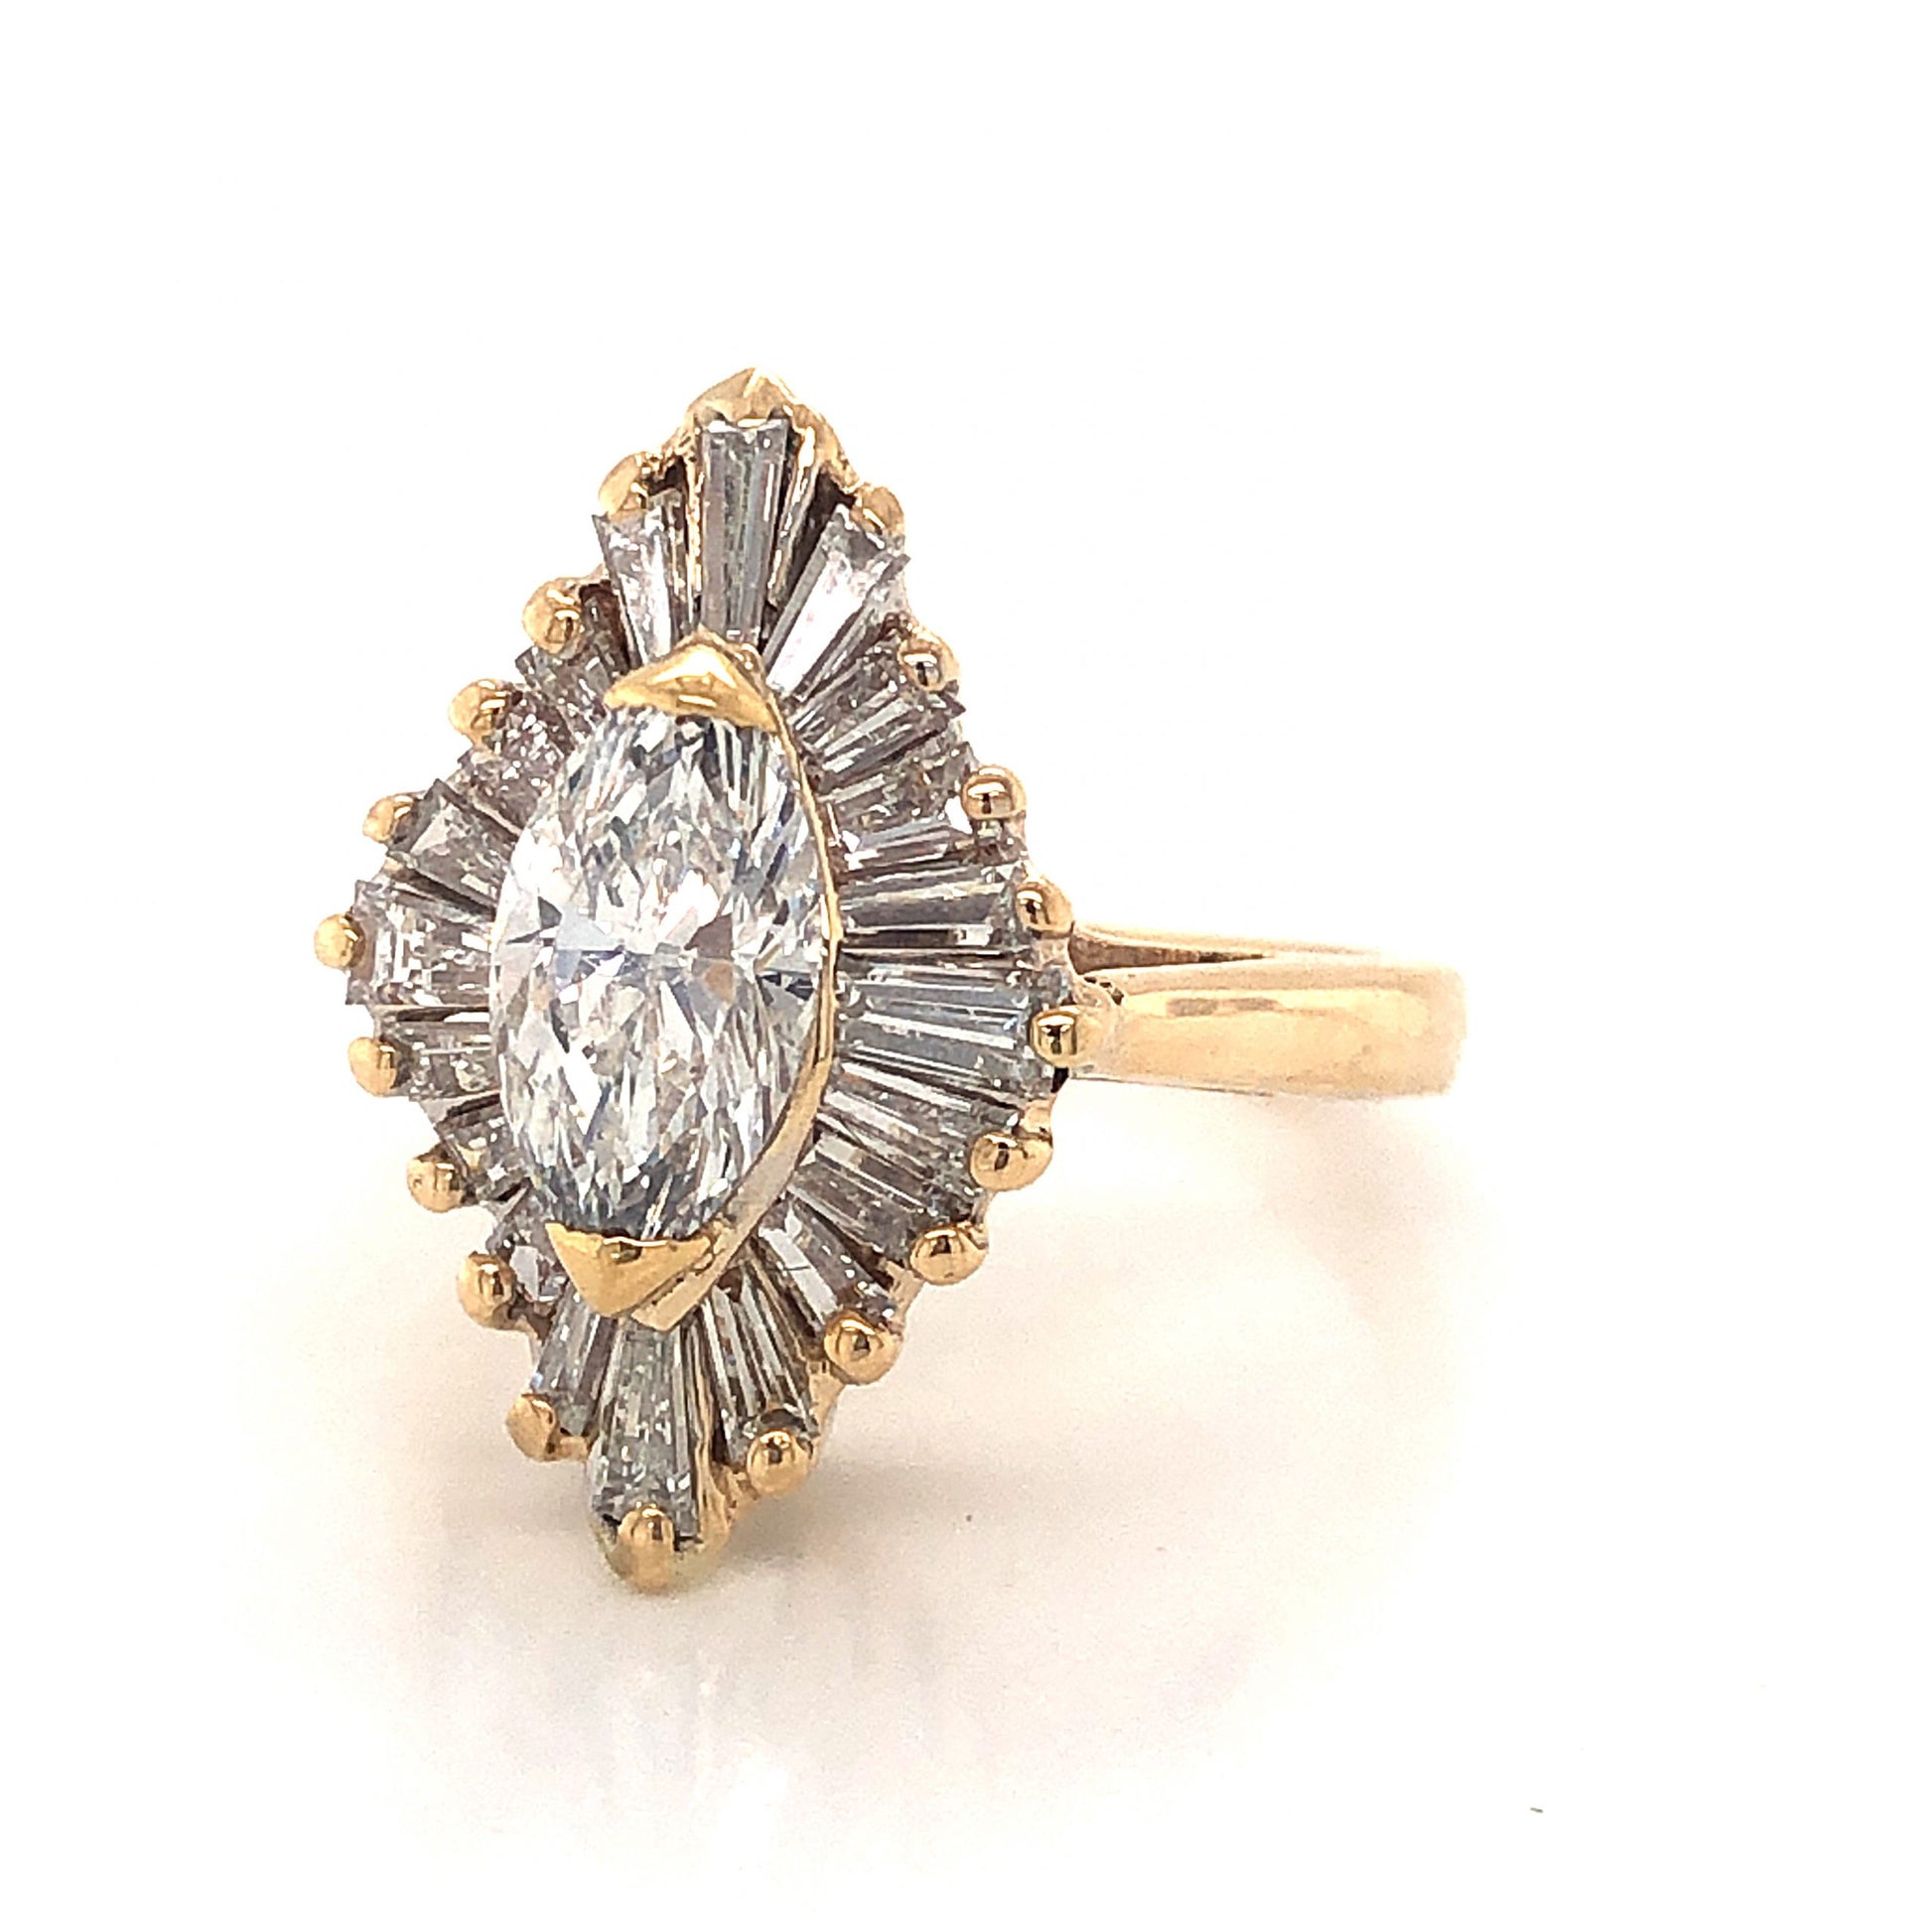 Ballerina Halo Marquise Cut Diamond Engagement Ring in 14KComposition: 14 Karat Yellow Gold Ring Size: 5.25 Total Diamond Weight: 2.22ct Total Gram Weight: 4.9 g